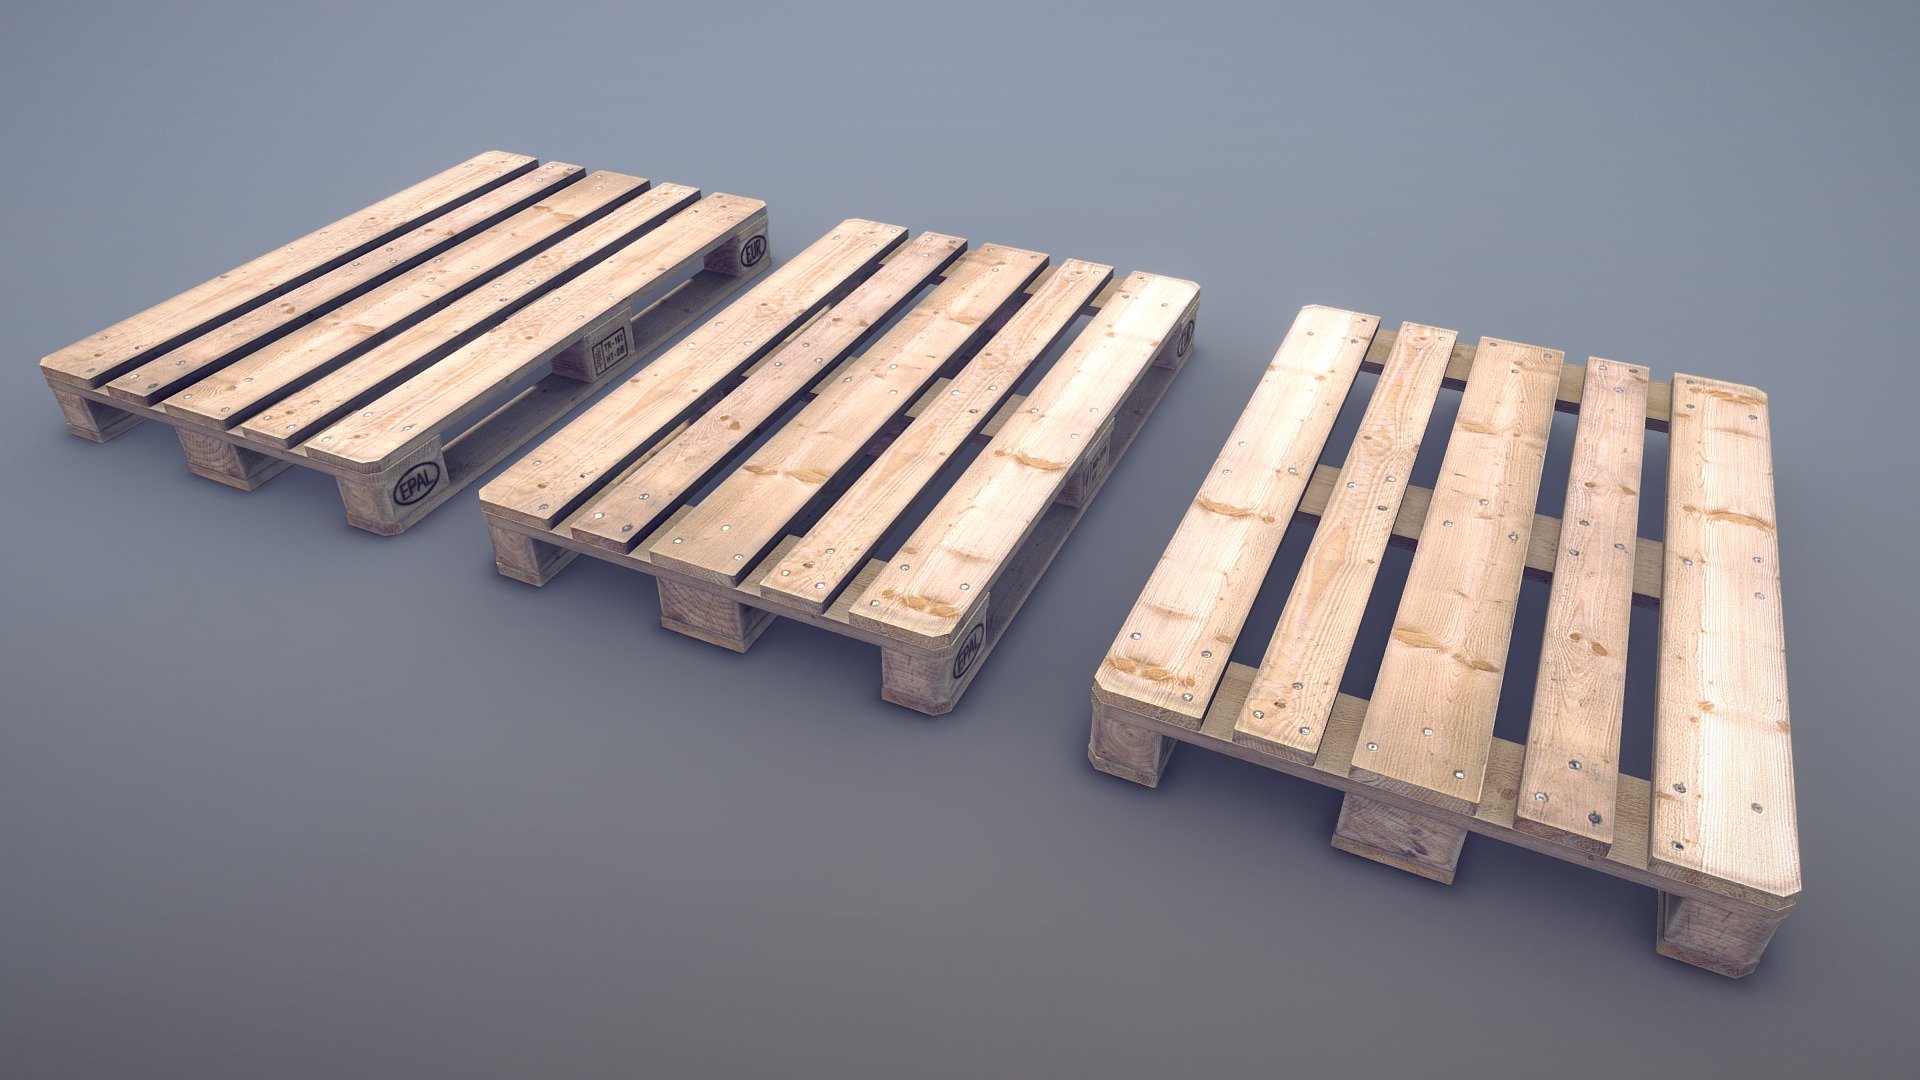 Cargo Wood Pallets EUR EPAL vr.1




LOD0 - (triangles 452) / (points 320)

LOD1 - (triangles 260) / (points 192)

LOD2 - (triangles 116) / (points 160)

Low-poly 3D model Wooden Pallets EUR EPAL with LODs
(three pallet variations) (size 1200mm - 800mm - 145mm) (texture vr.1 - &ldquo;new pallets